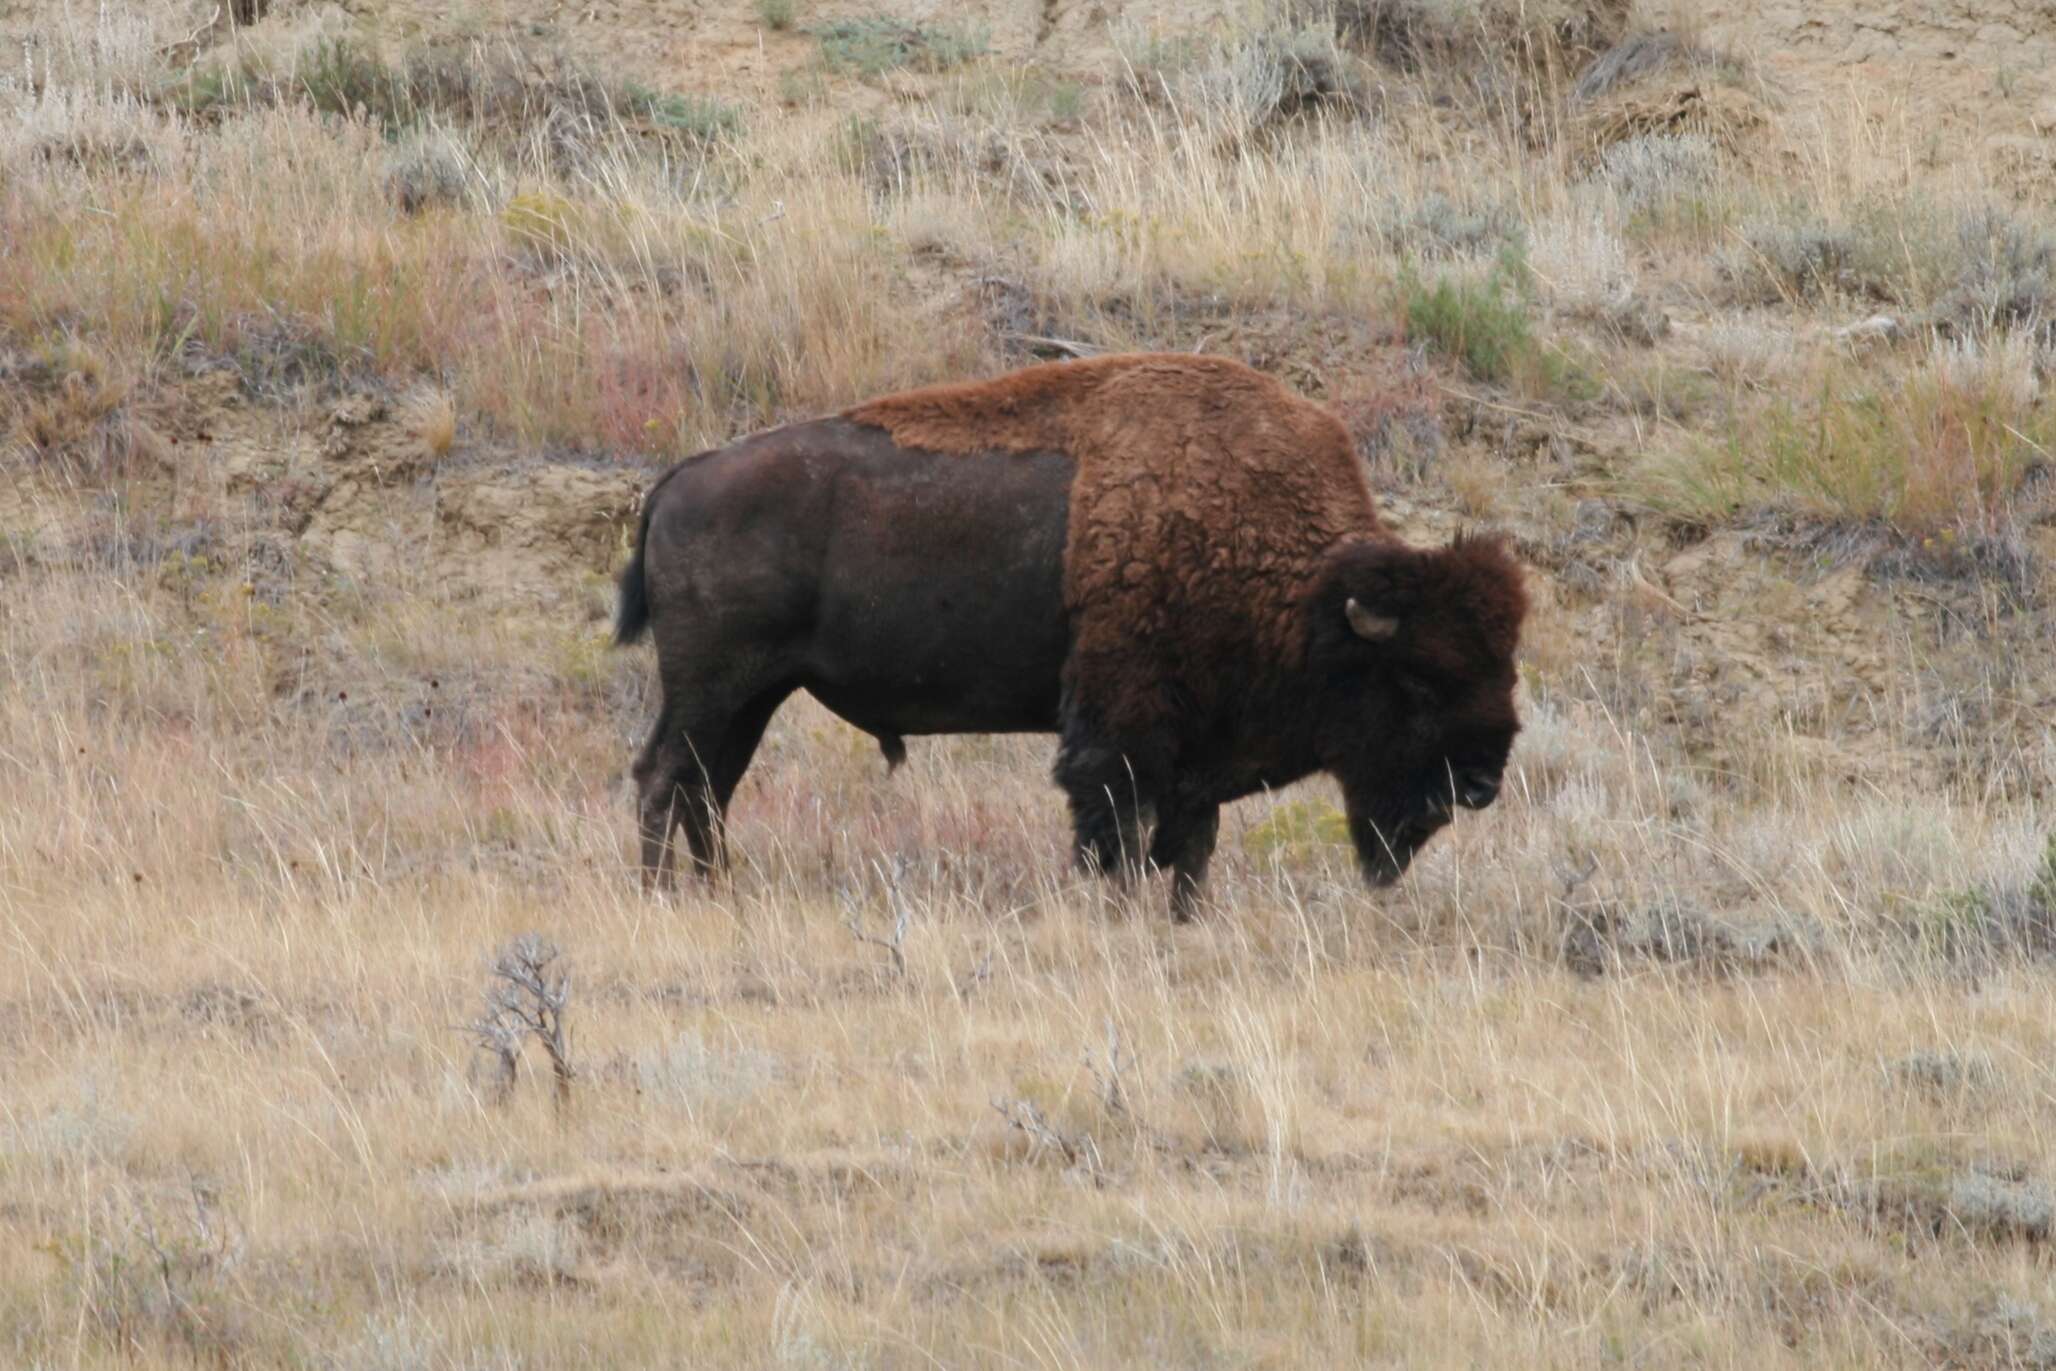 Image of Bison C. H. Smith 1827